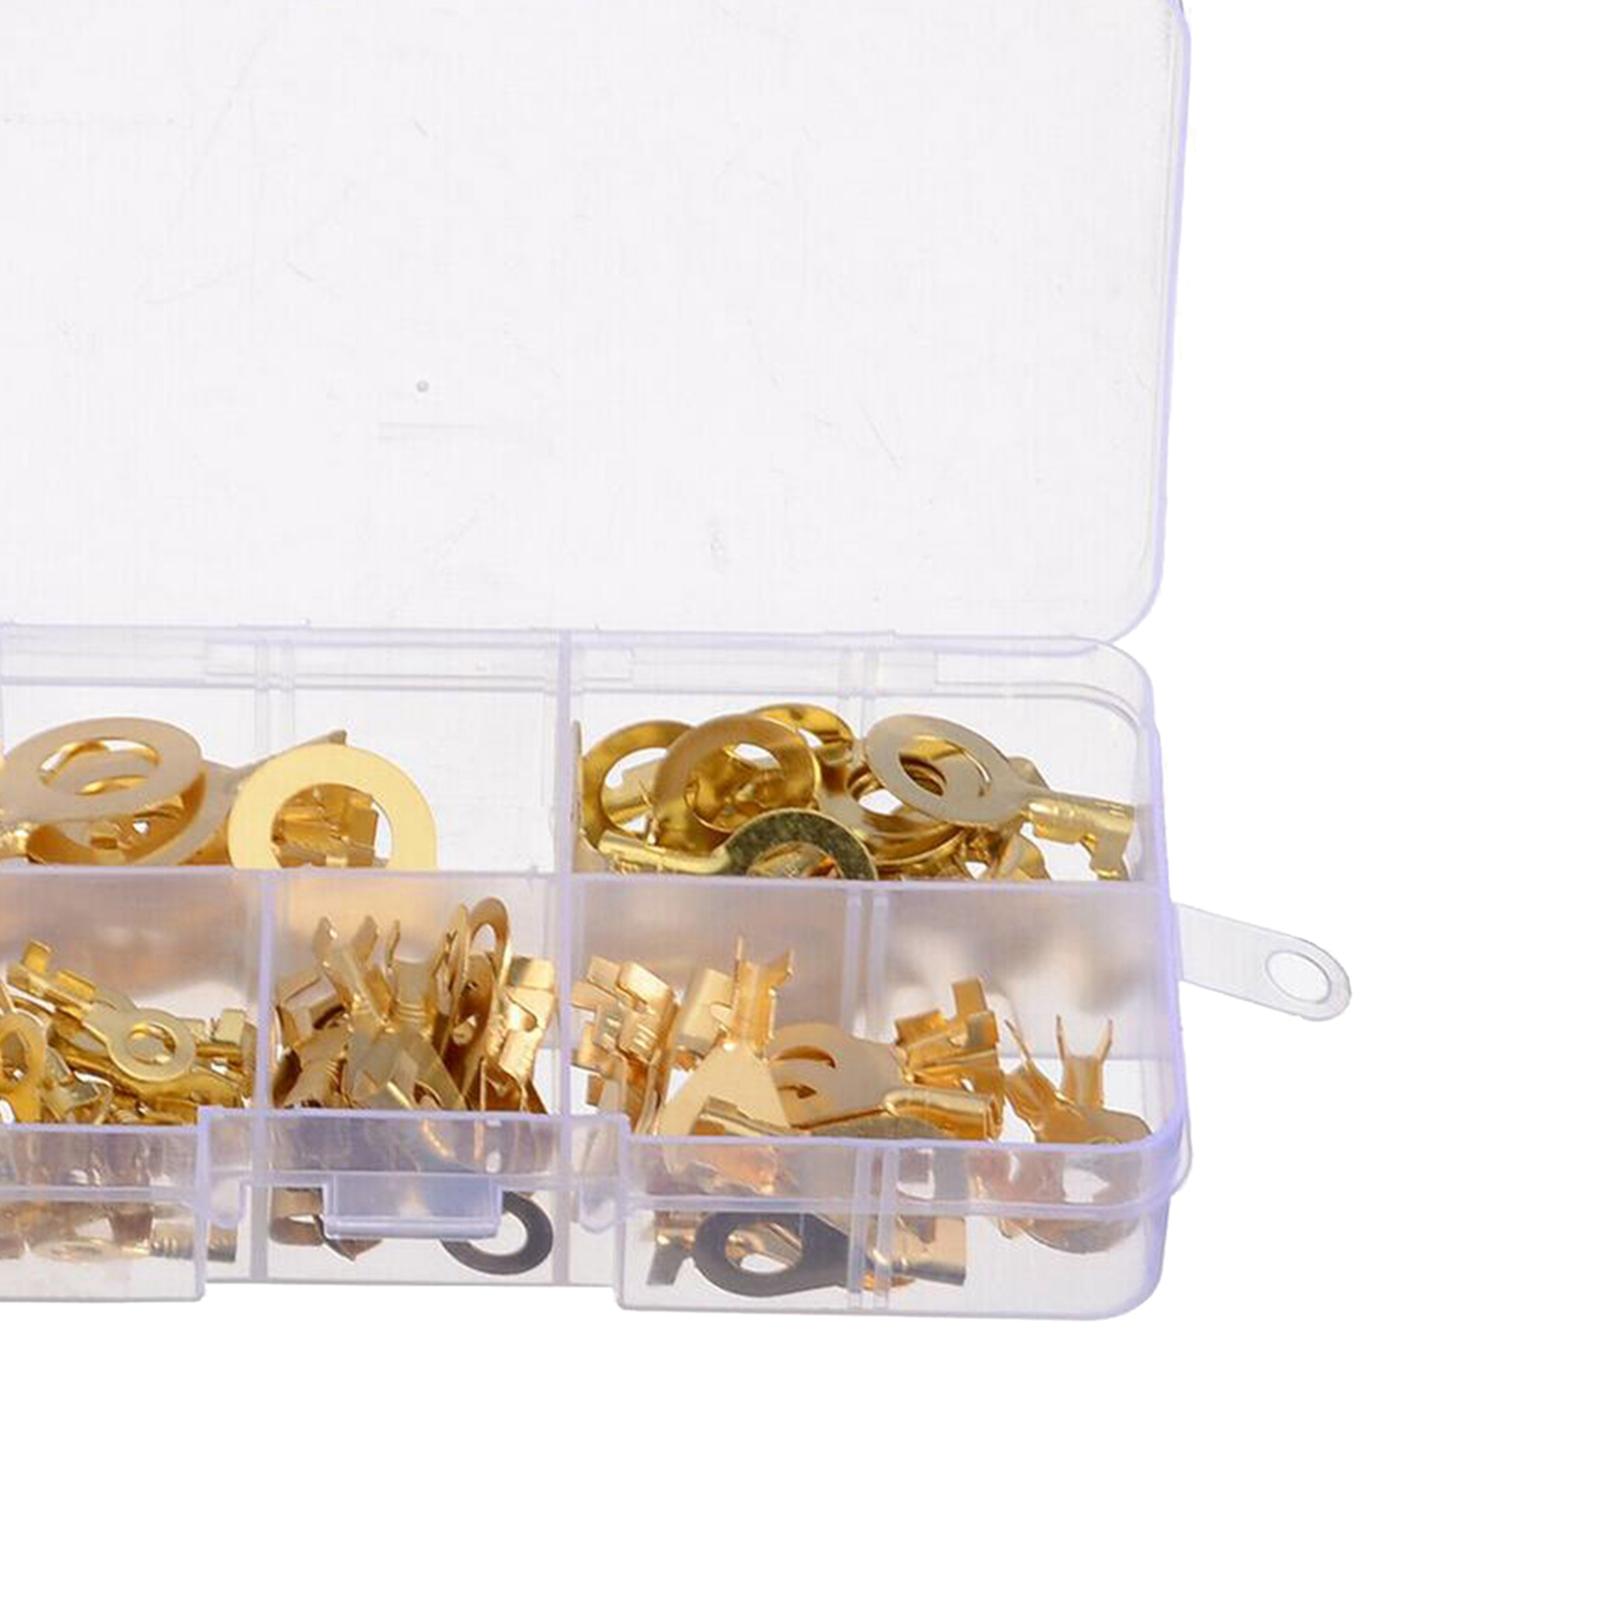 Golden  Crimp Terminals Spade Assorted Electrical Kits with Storage Box